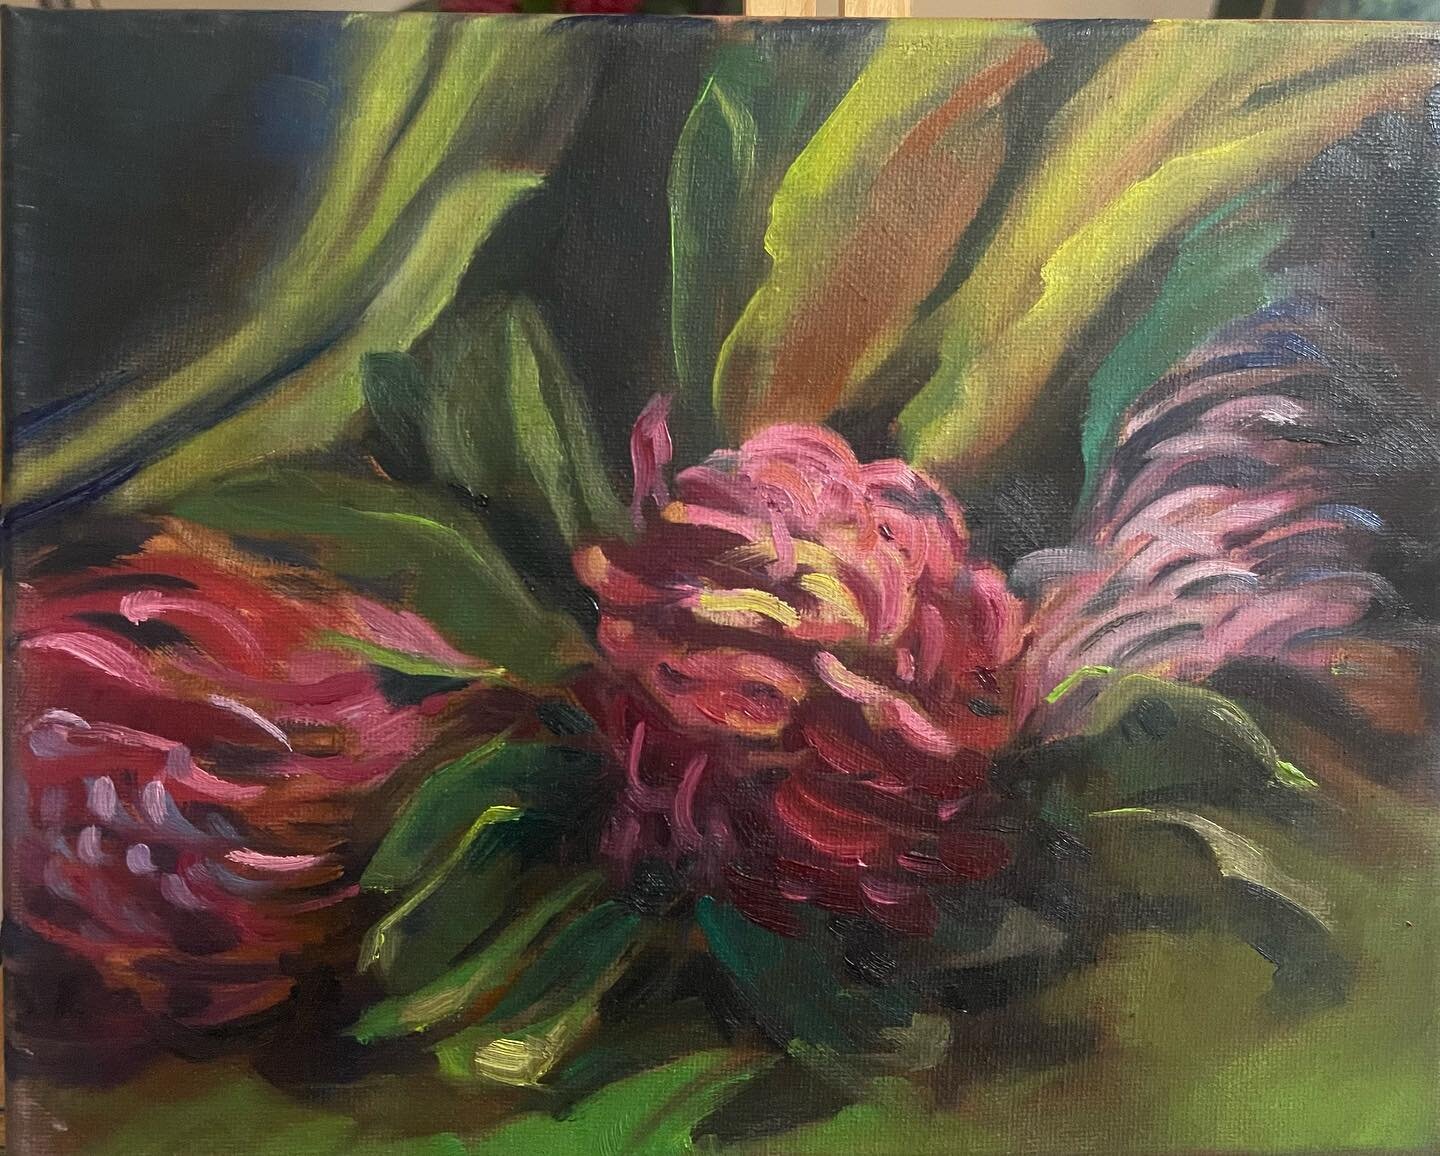 How do you start an oil painting?  Let me show you .  #cherylwillcoxart#oilpainting #pickout#waratah #artistcentralcoastnsw #nativeflowers#petitepainting